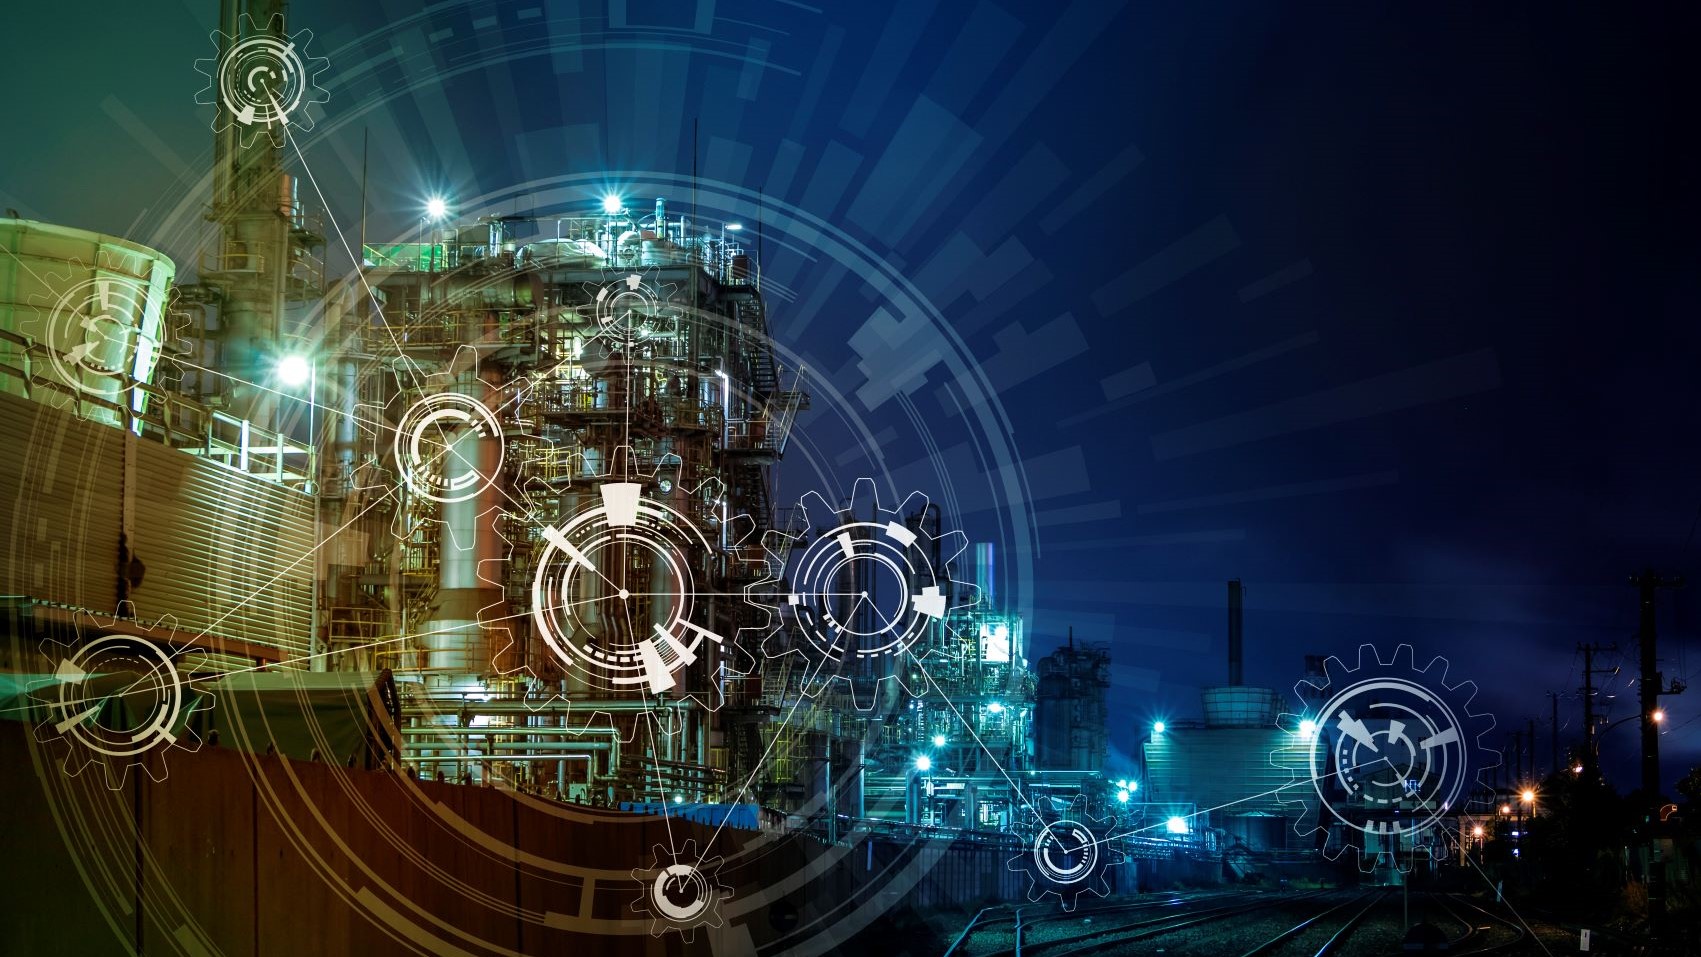 Article On-demand Webinar: Using IoT to Enable Advanced Analytics for Utilities  Image